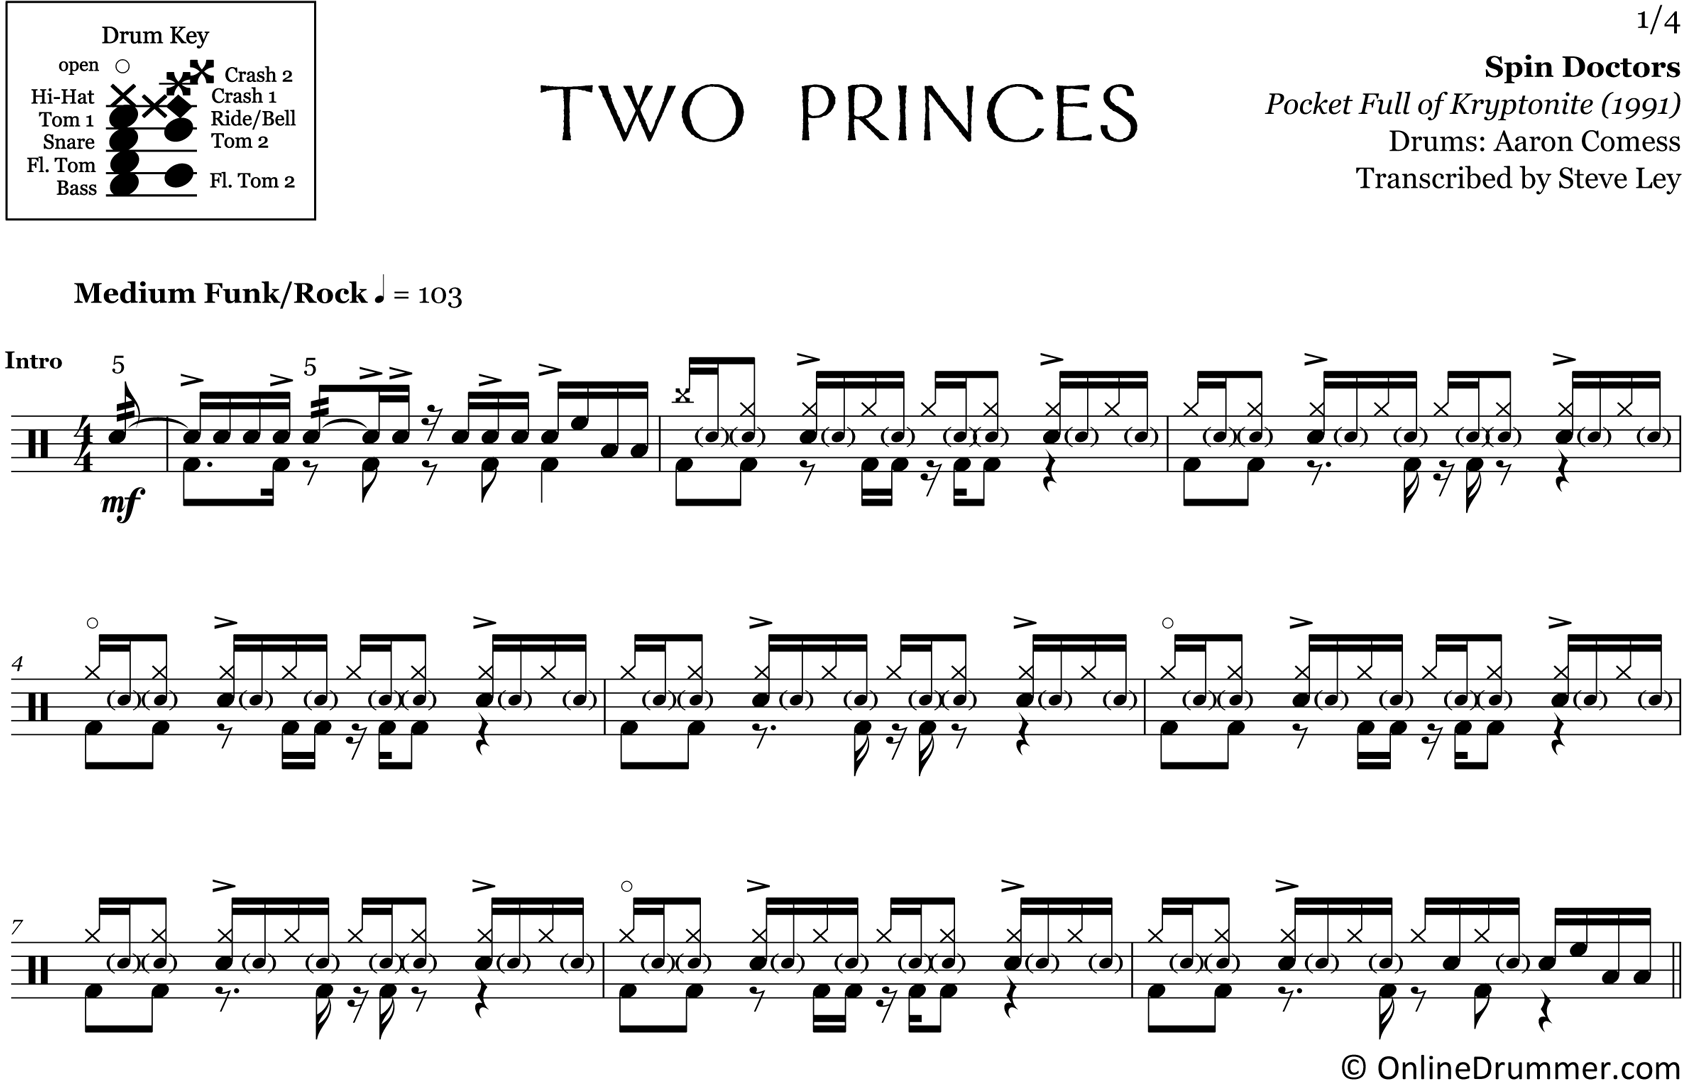 Two Princes - Spin Doctors - Drum Sheet Music